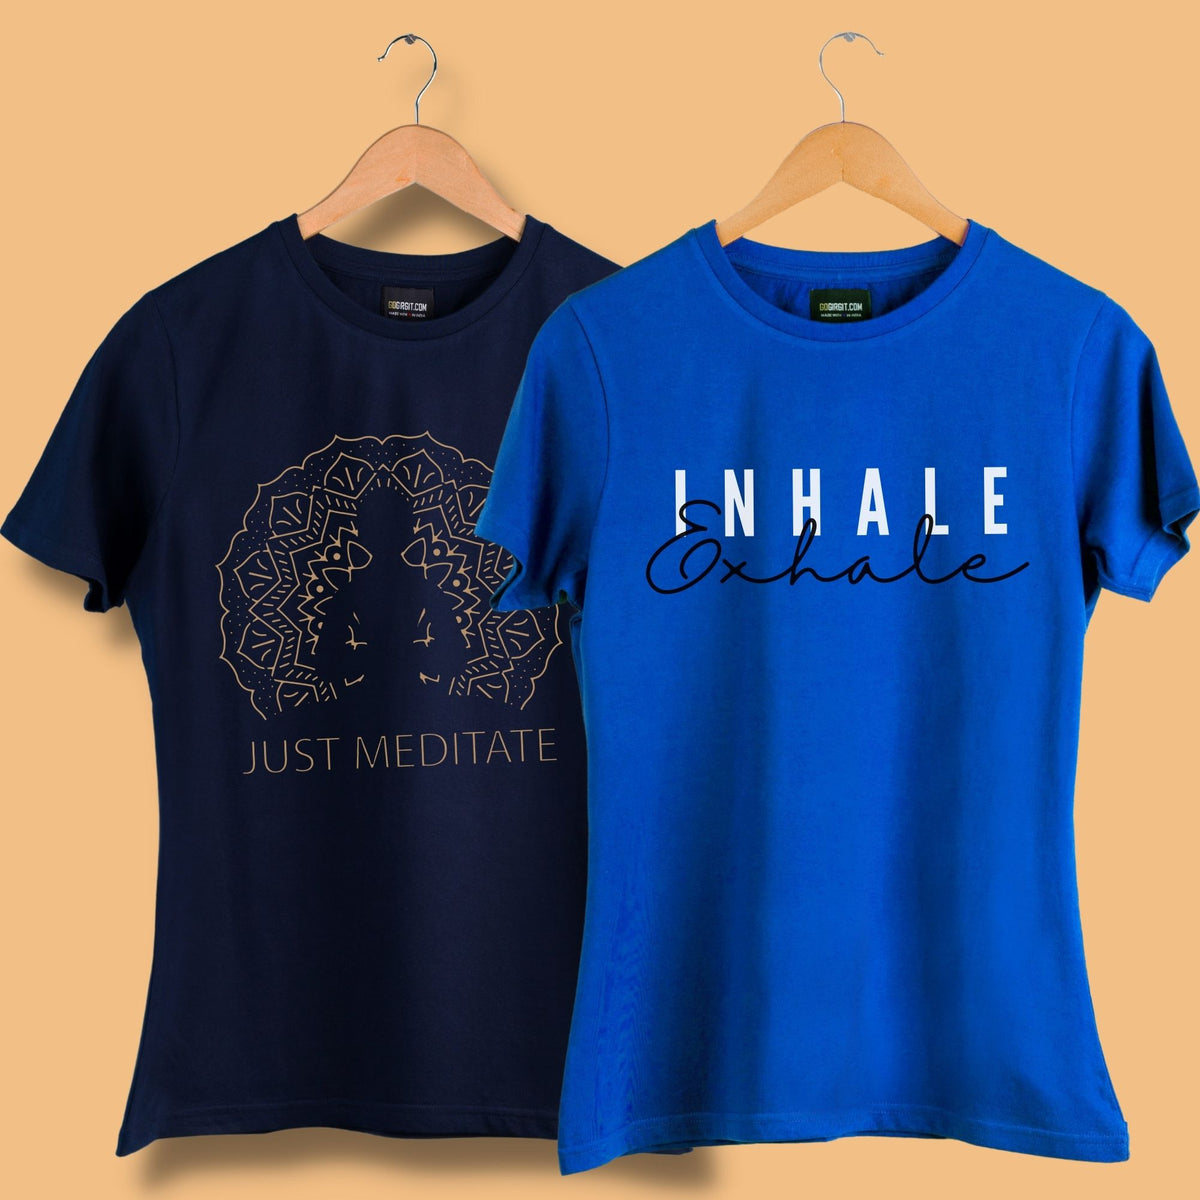 Yoga T Shirt Womens designs, themes, templates and downloadable